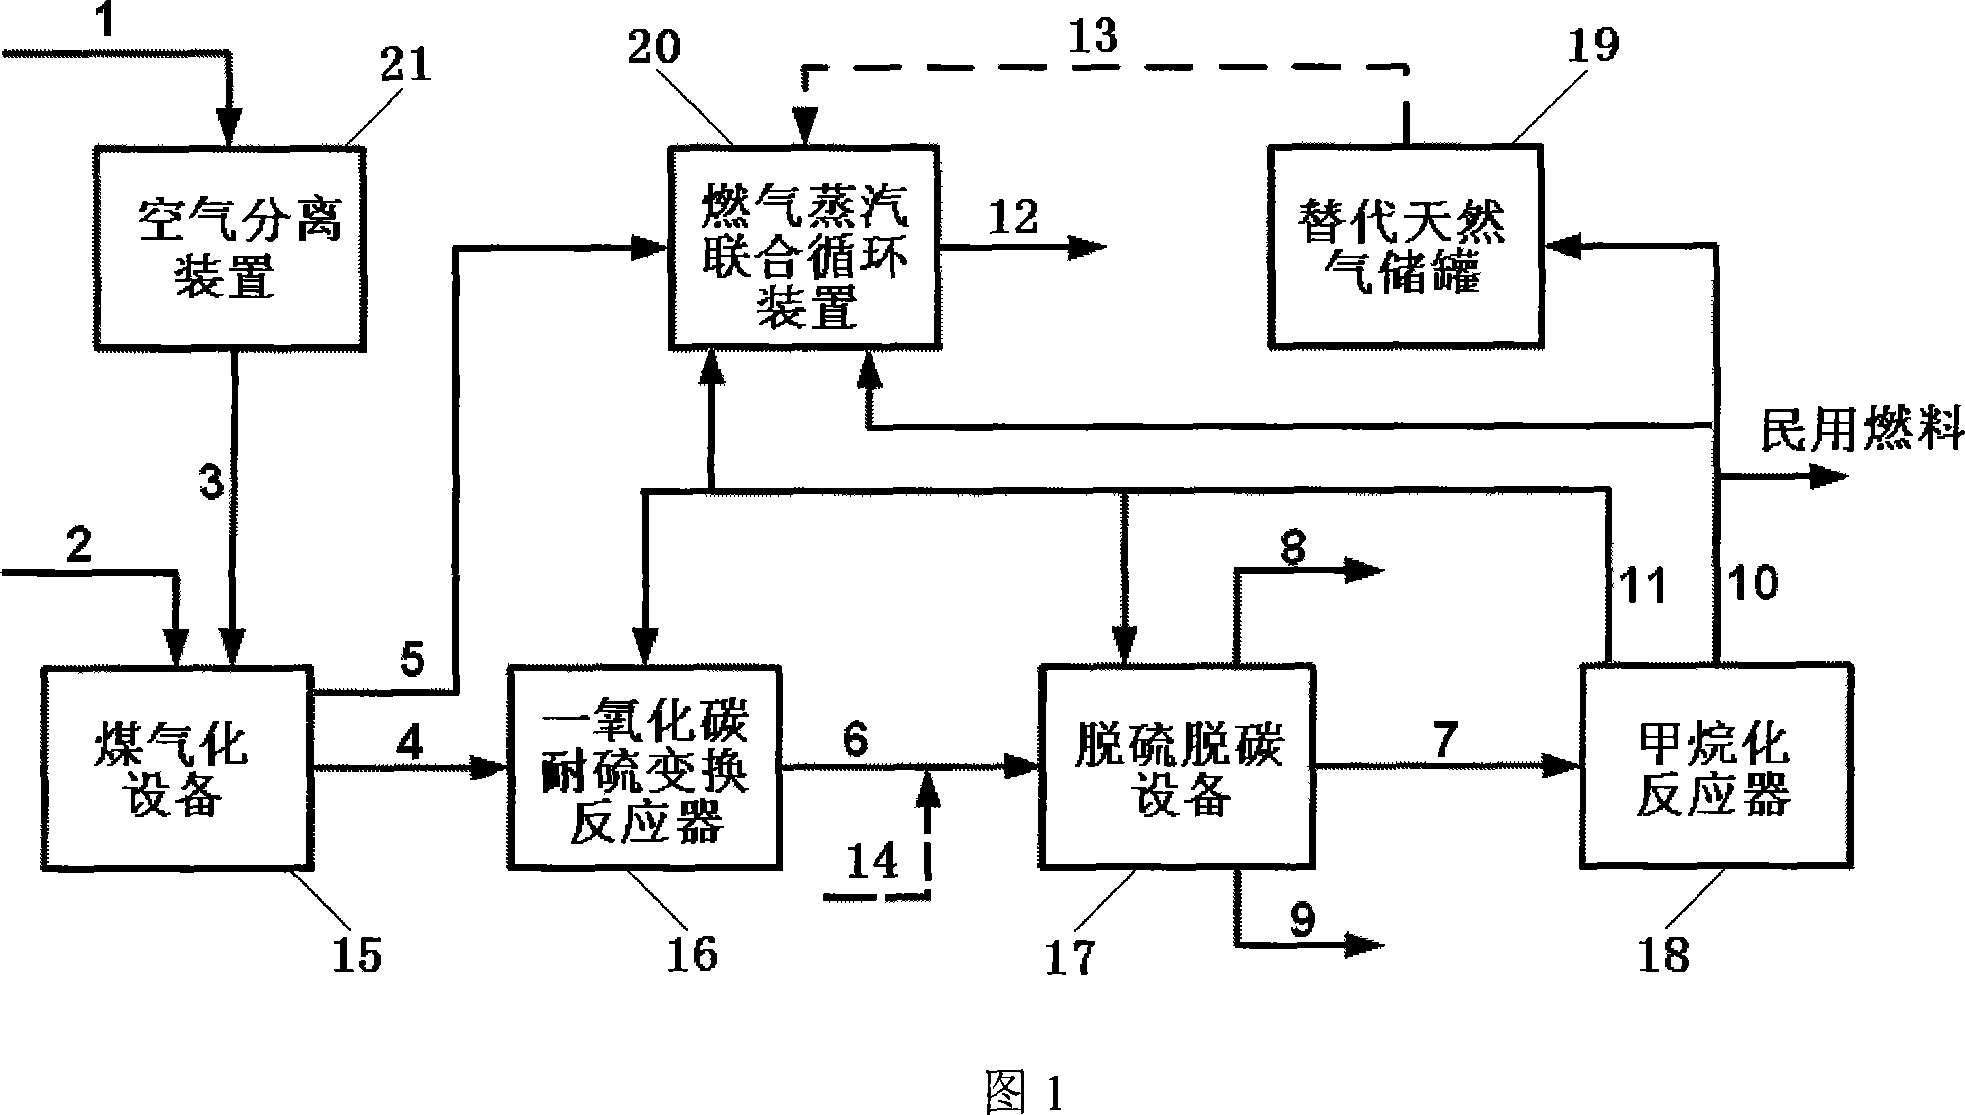 Combined system and process for producing electric-substituted natural gas based on coal gasification and methanation